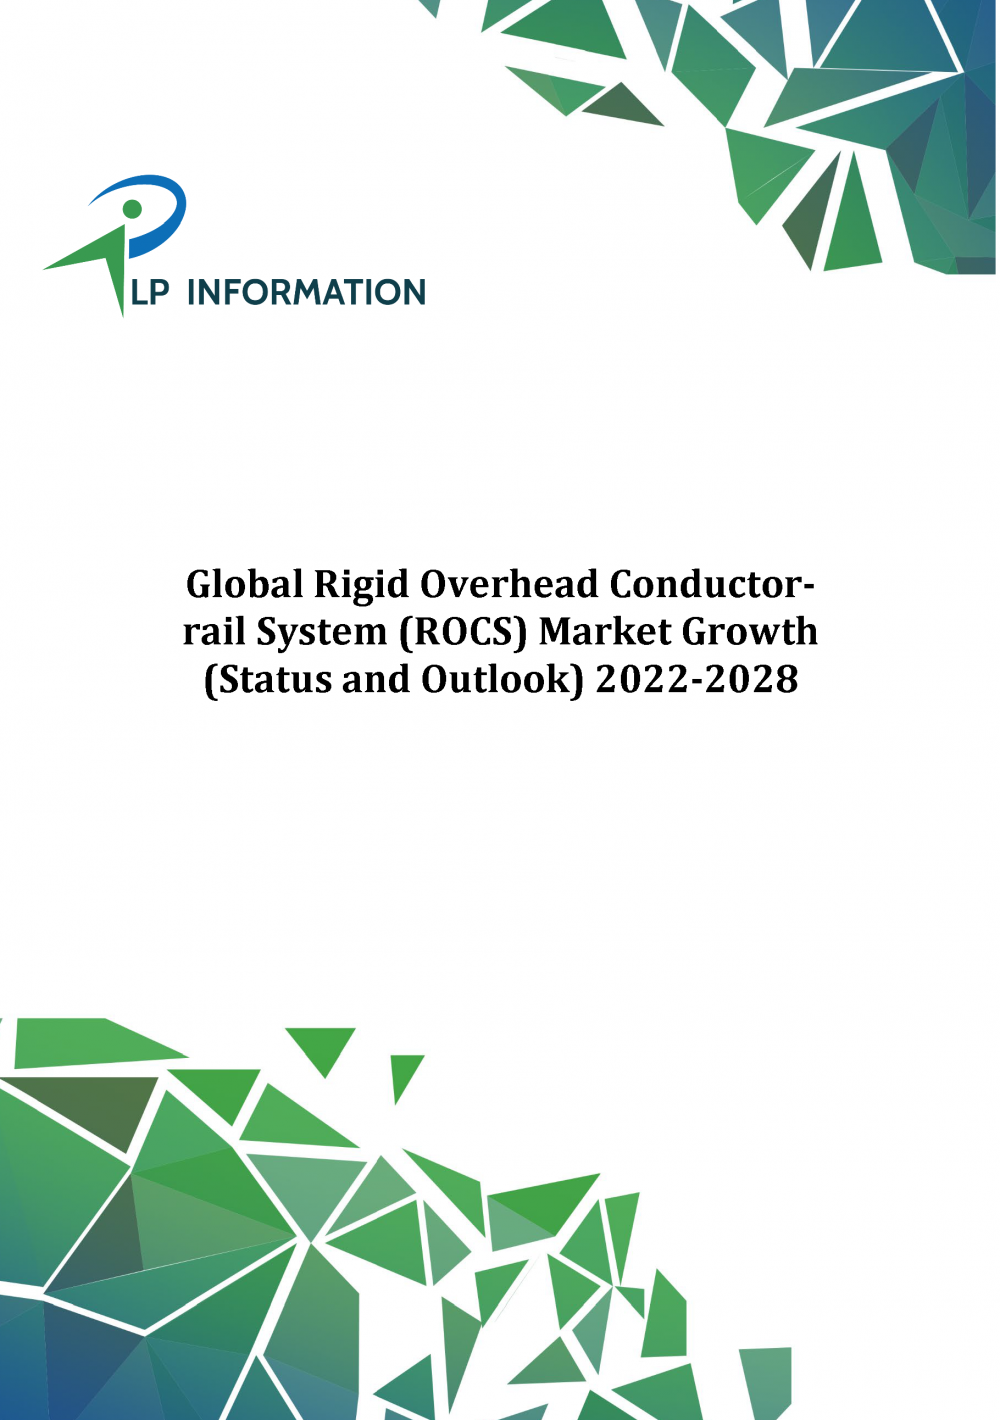 Global Rigid Overhead Conductor-rail System (ROCS) Market Growth (Status and Outlook) 2022-2028_cover